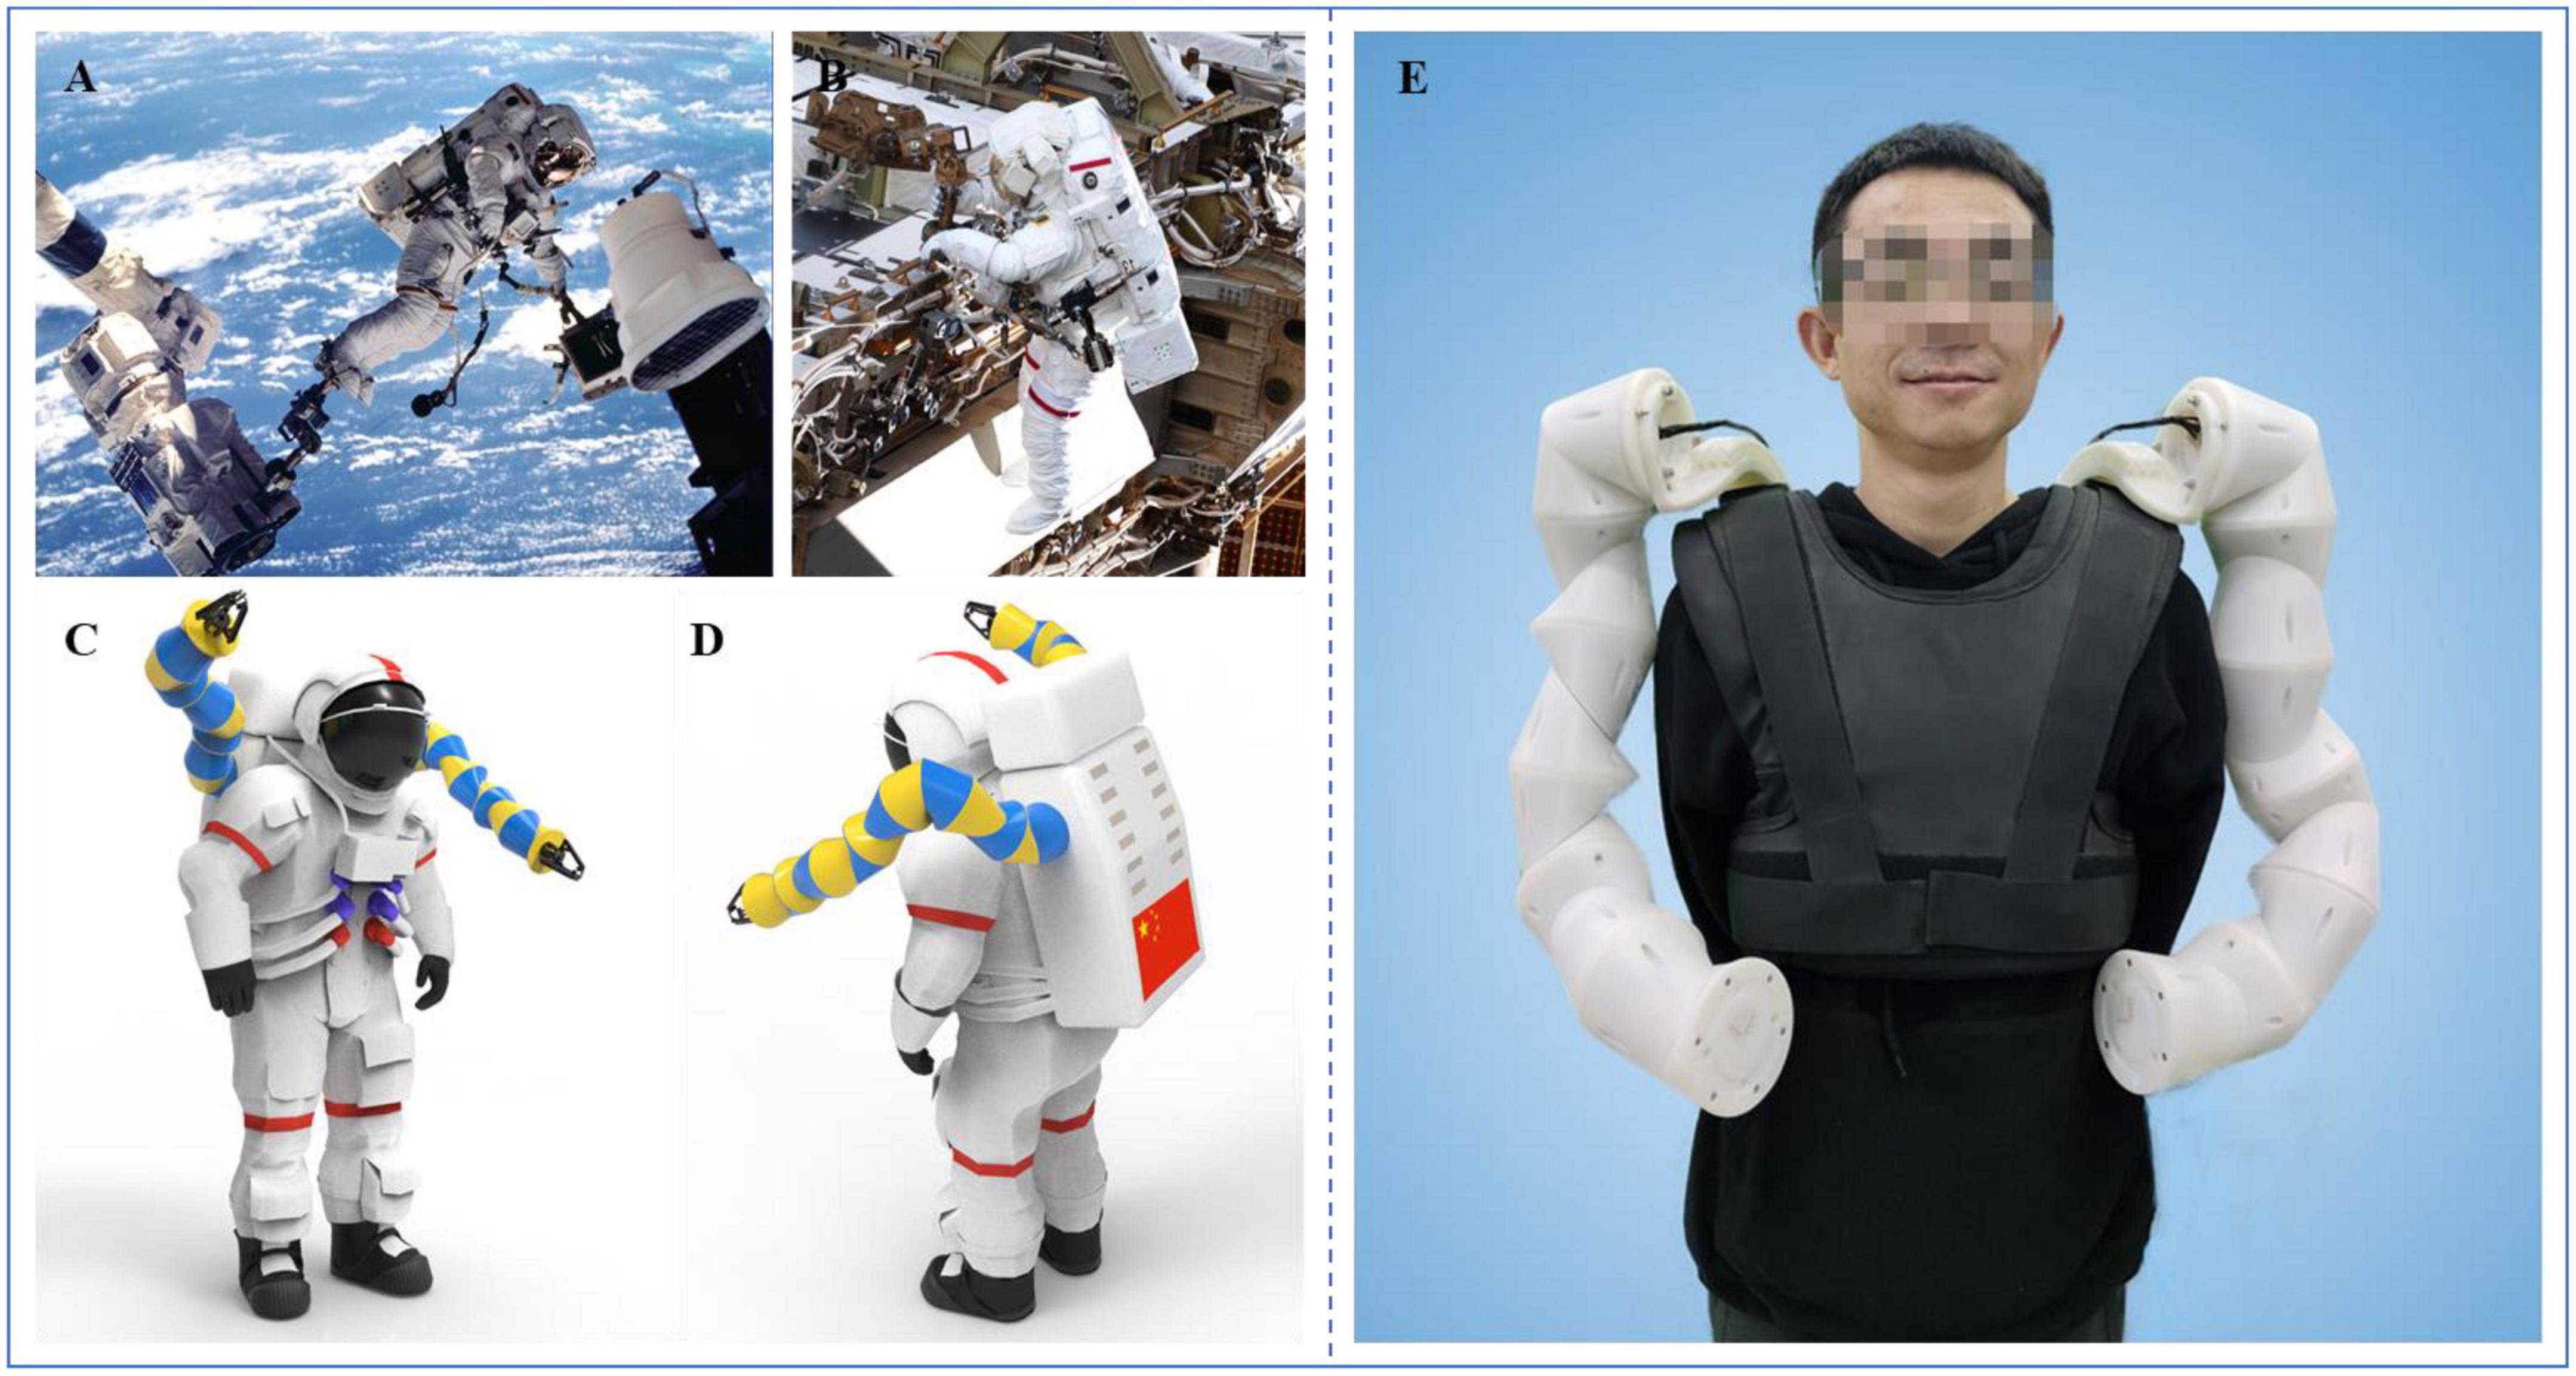 Reinforcement learning based variable damping control of wearable robotic limbs for maintaining <mark class="highlighted">astronaut</mark> pose during extravehicular activity